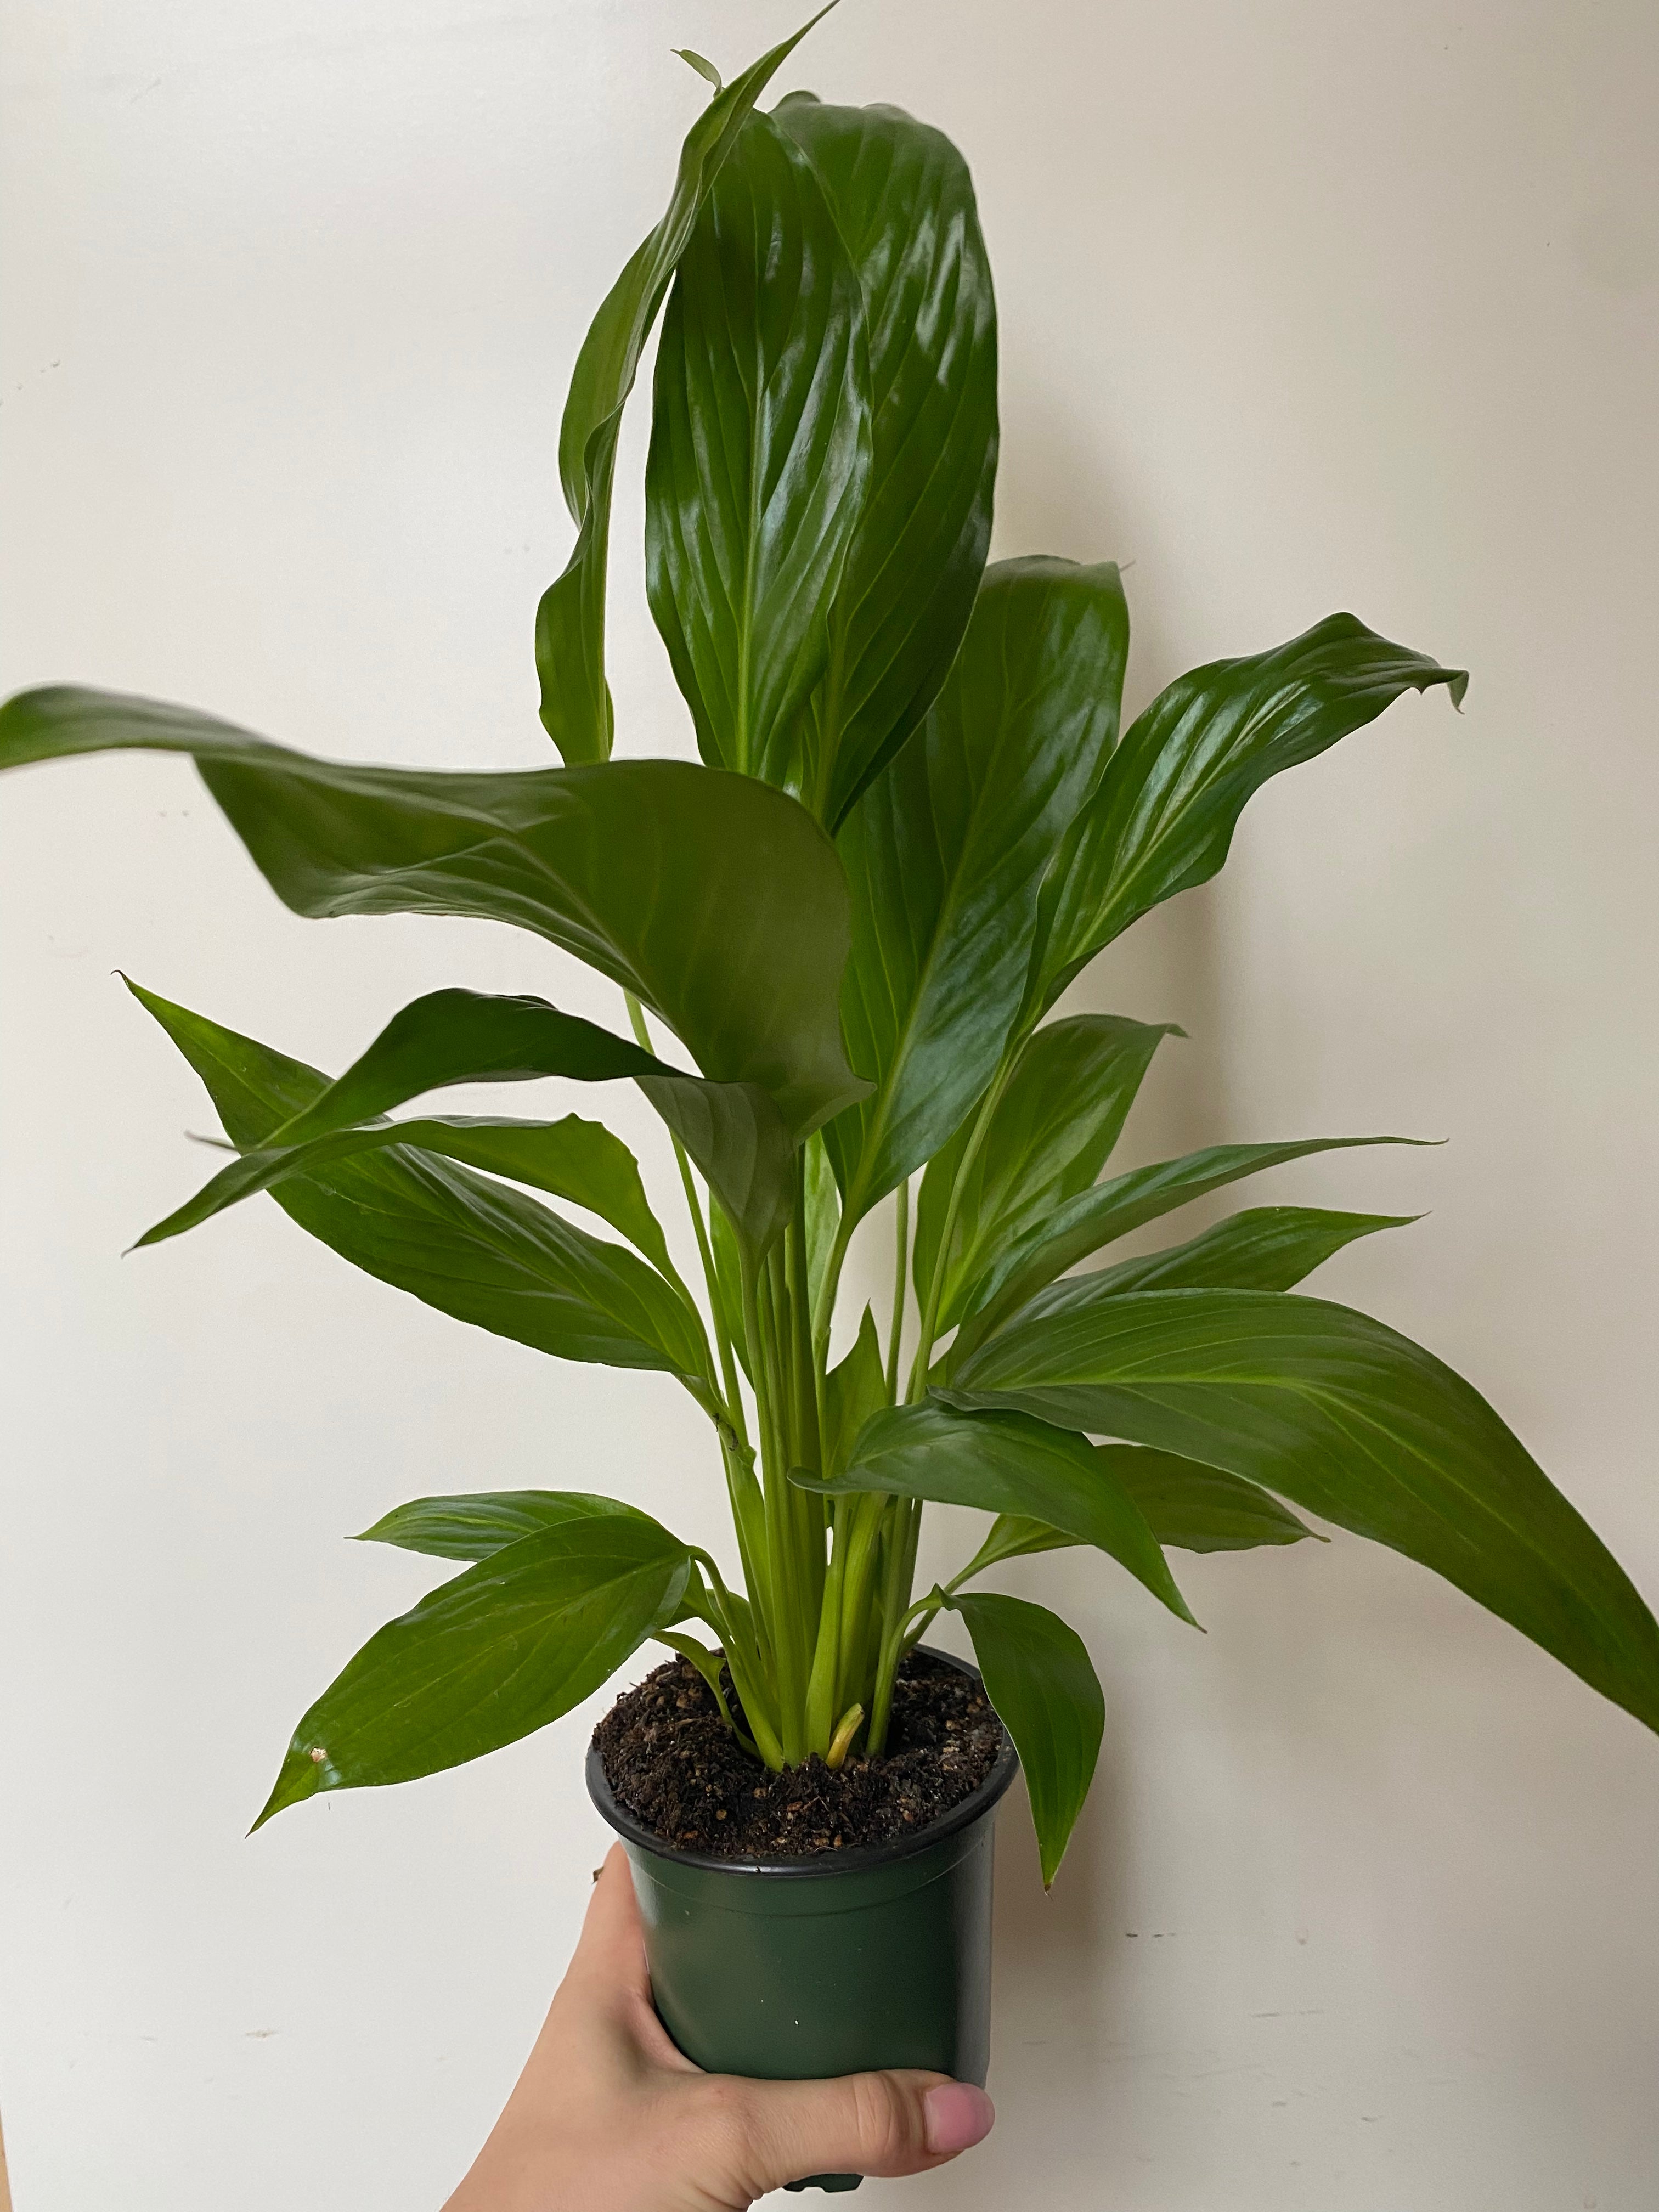 Spathiphyllum “Peace Lily”